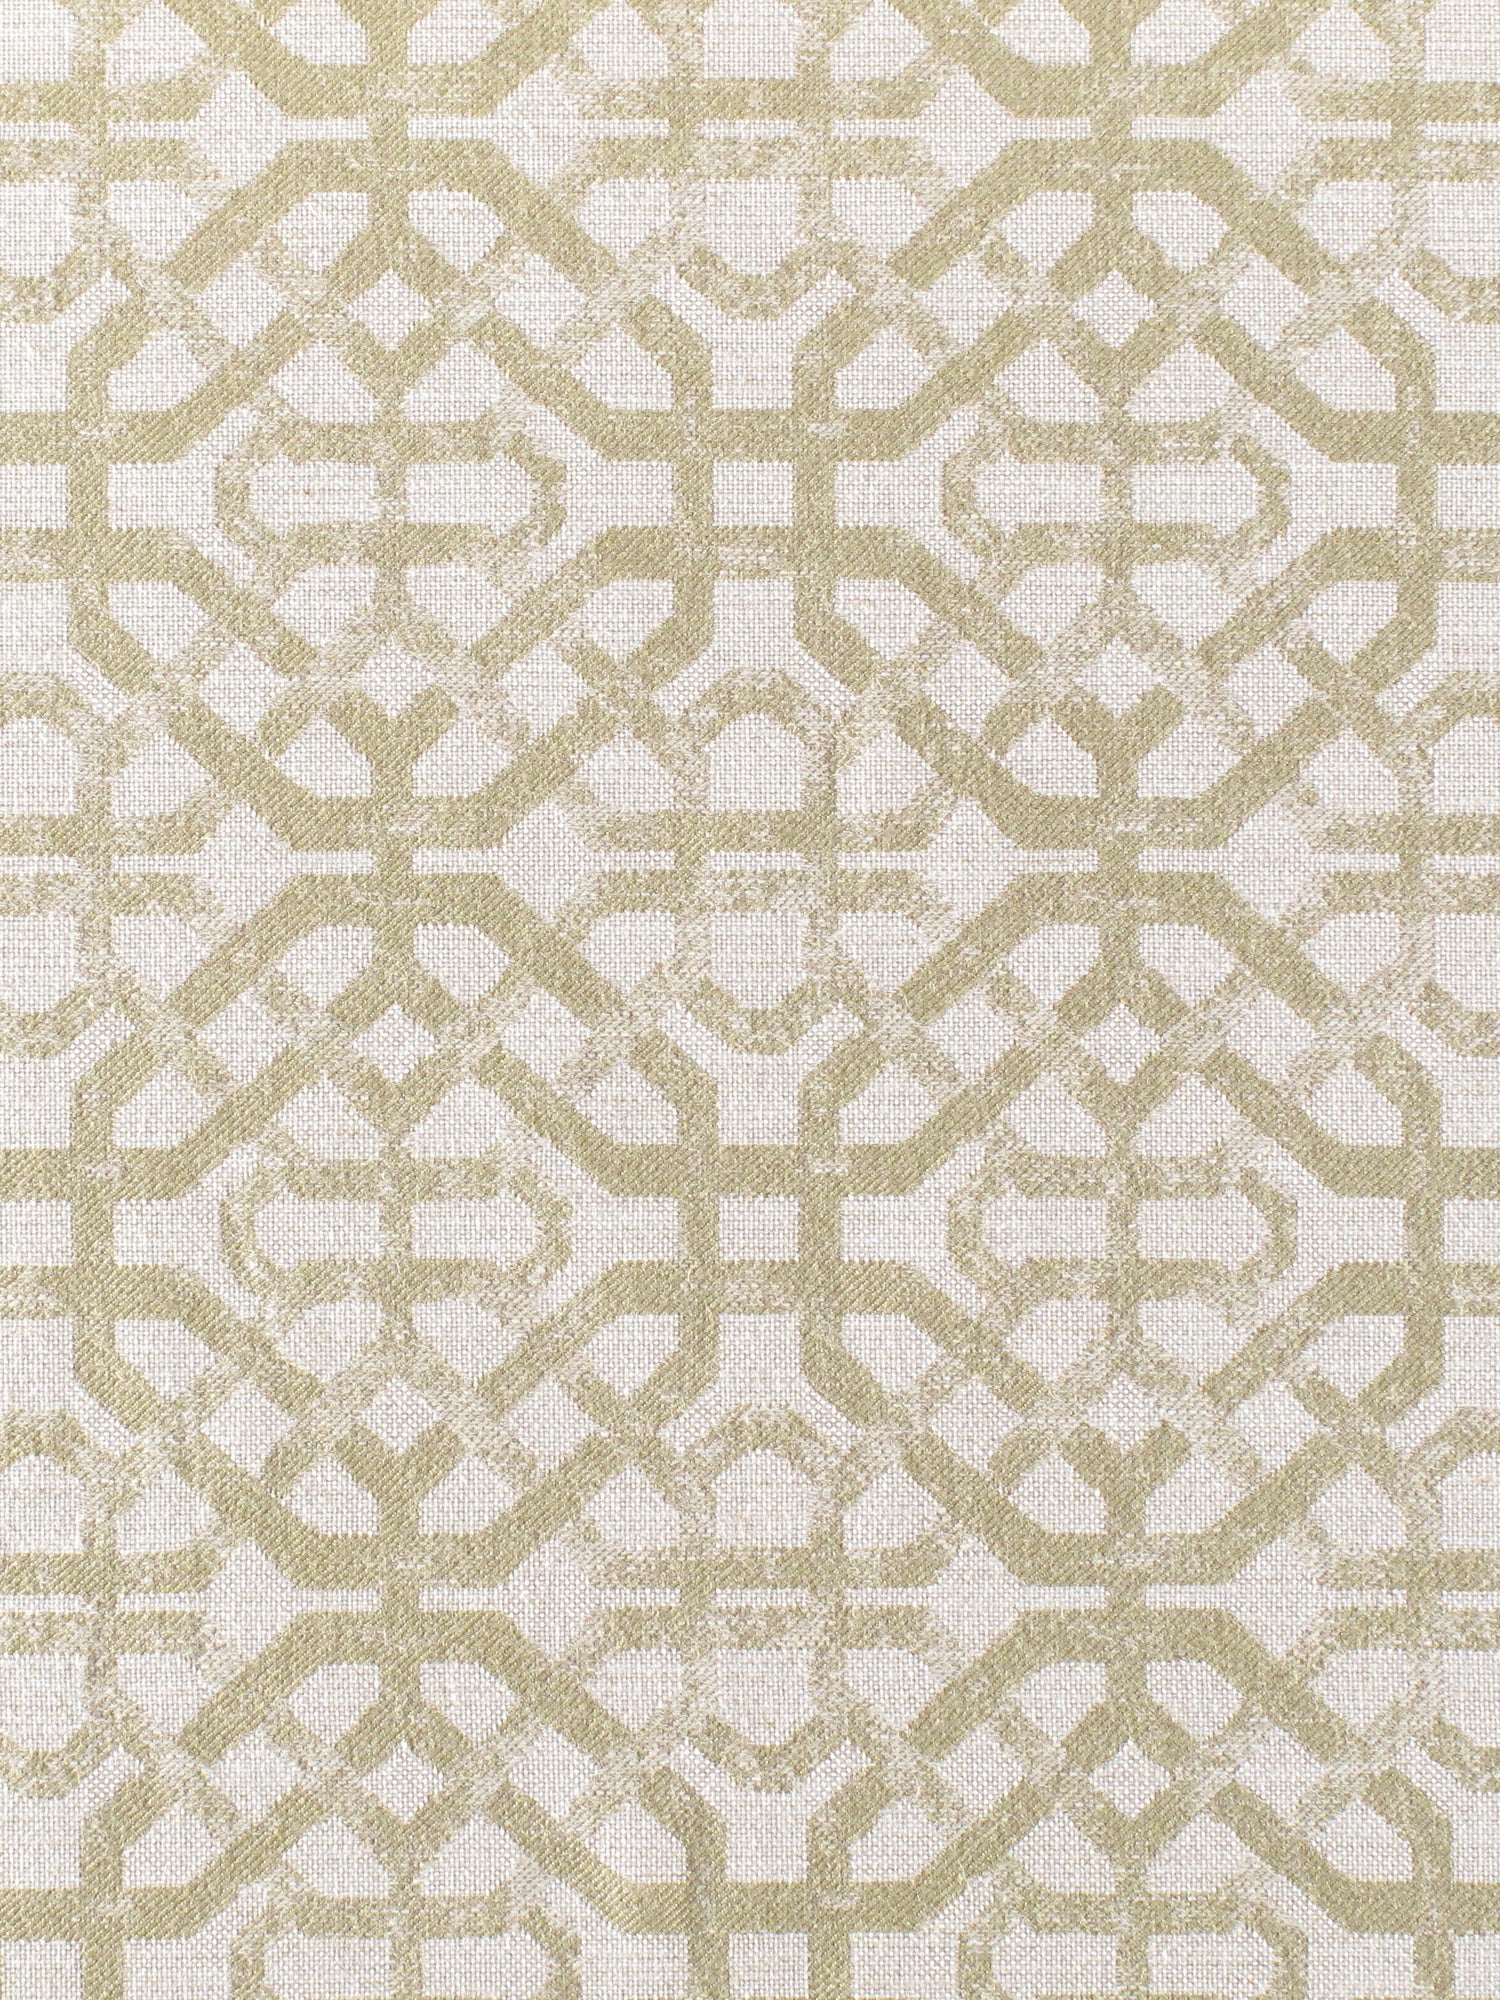 Porta Fregio fabric in leaf color - pattern number N3 00033133 - by Scalamandre in the Old World Weavers collection